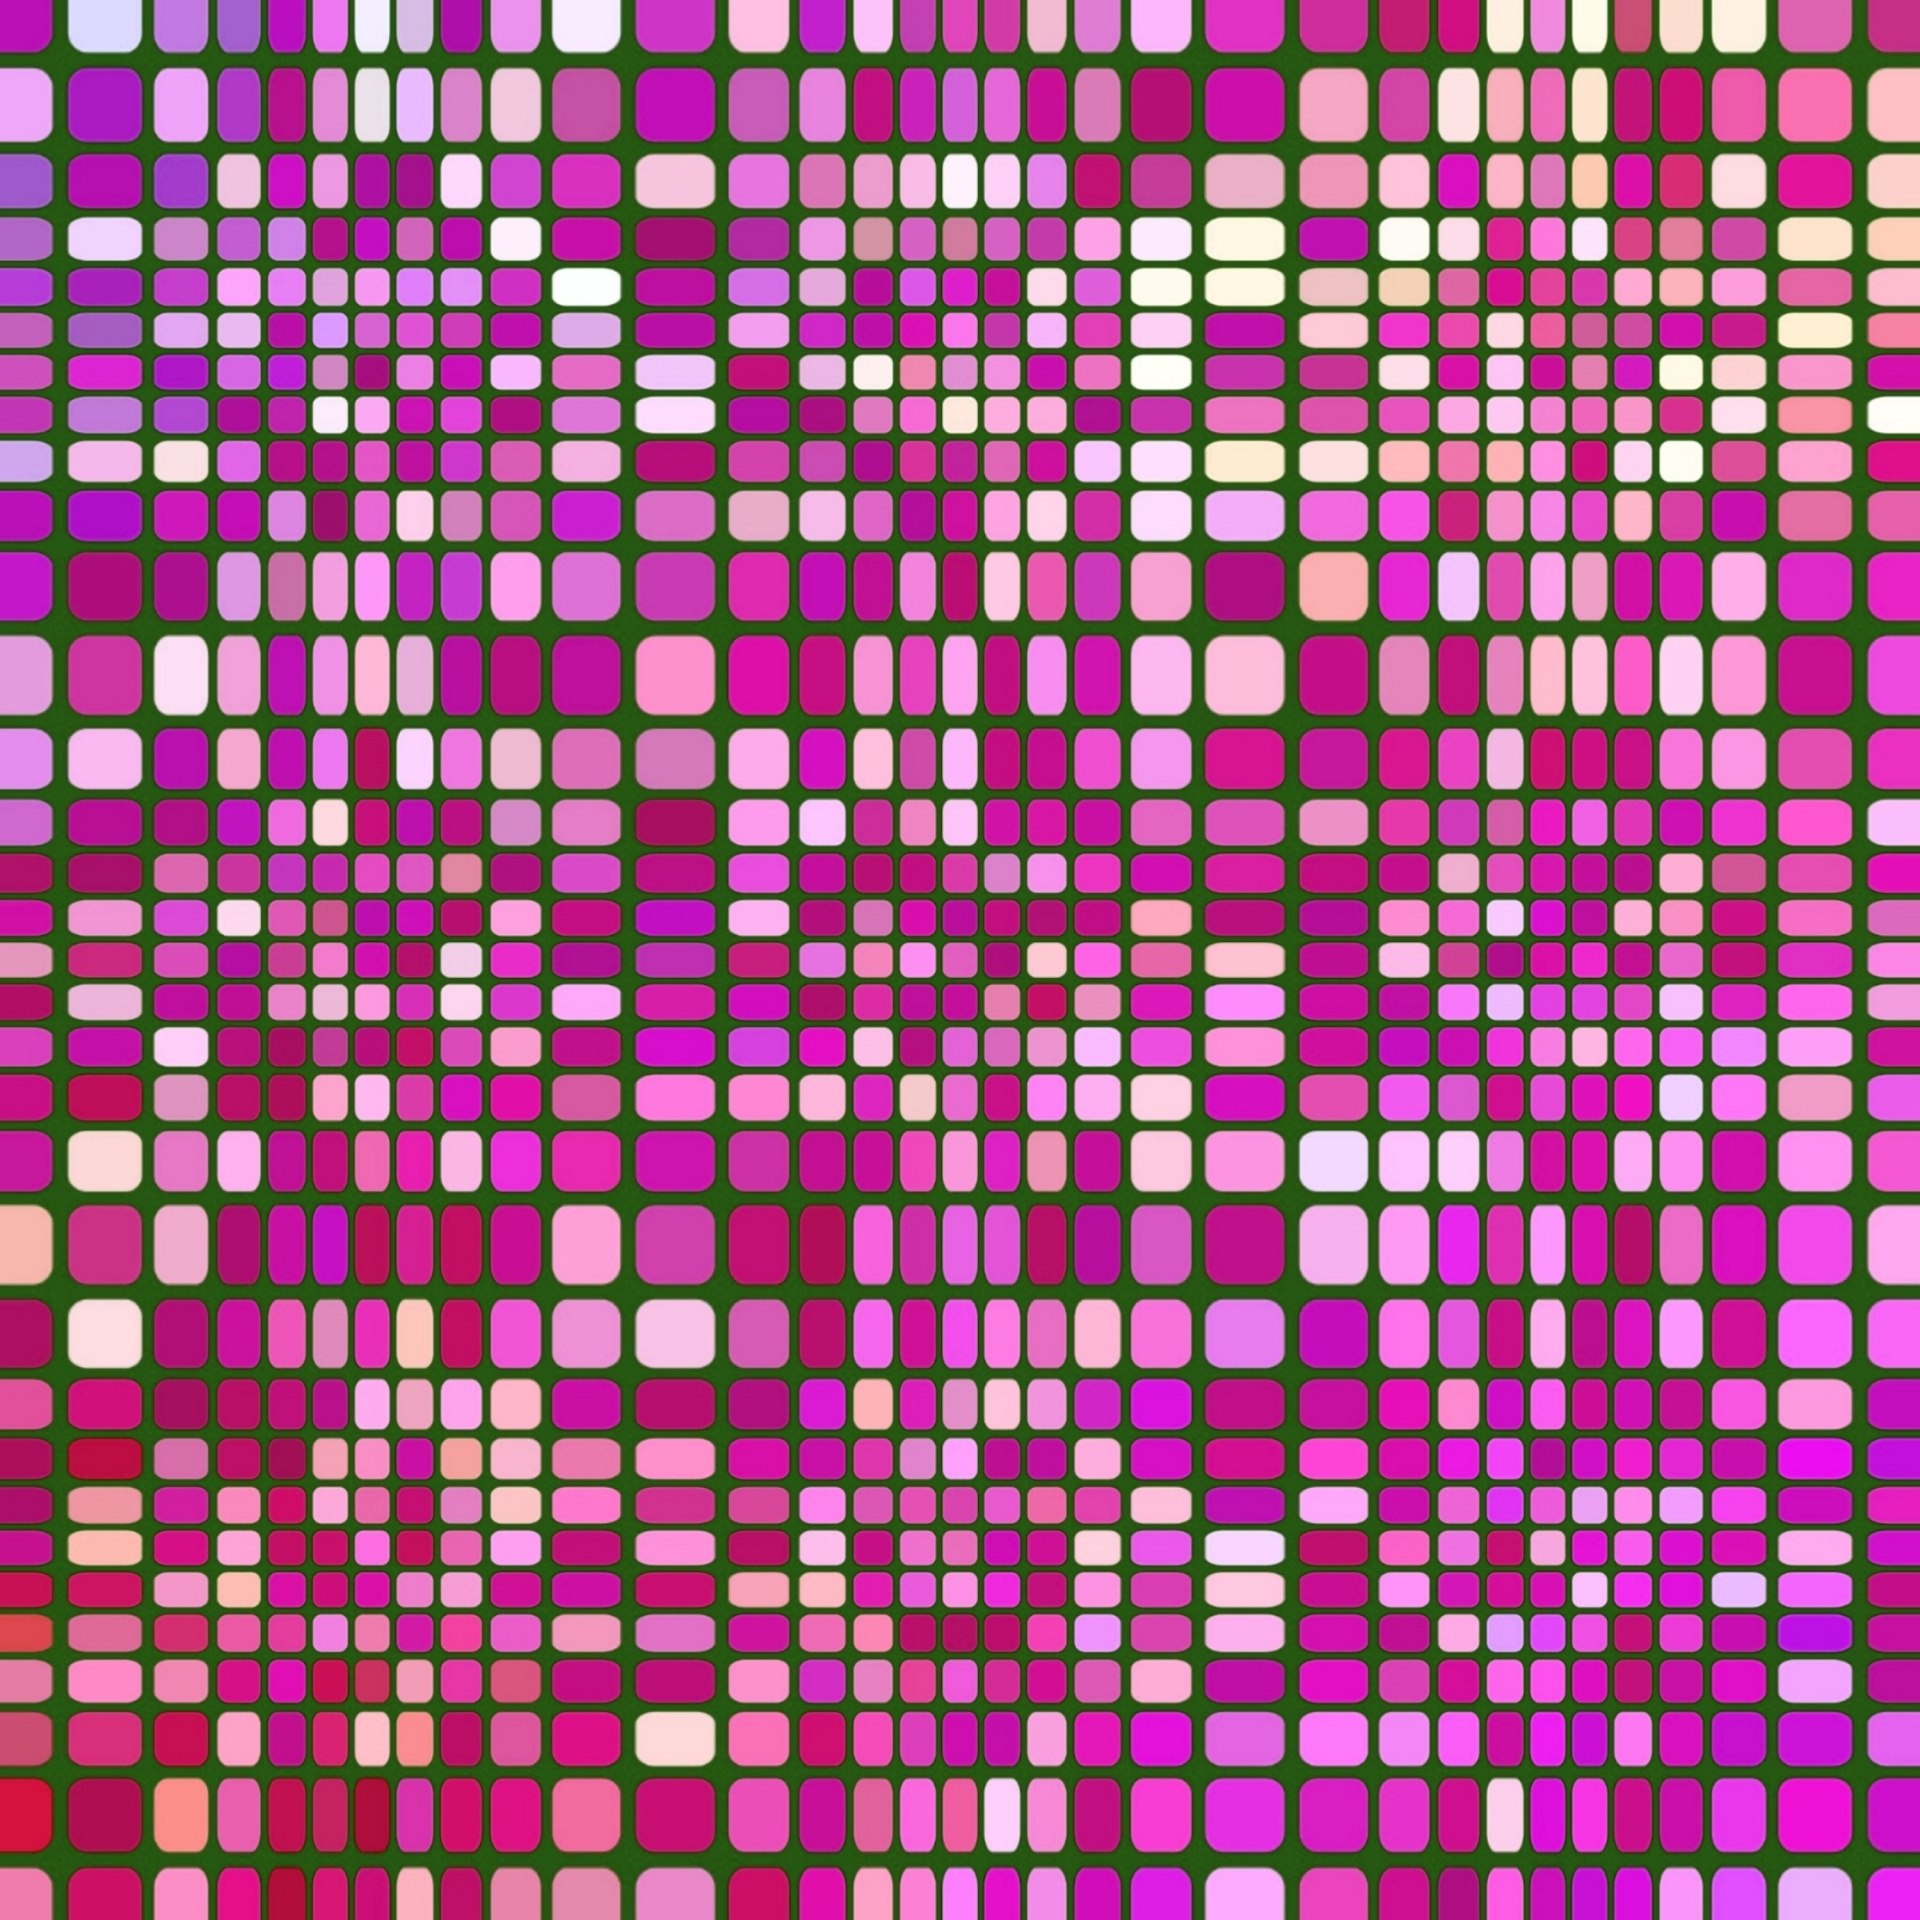 Tile Mosaic Pattern Background Free Stock Photo - Public Domain Pictures